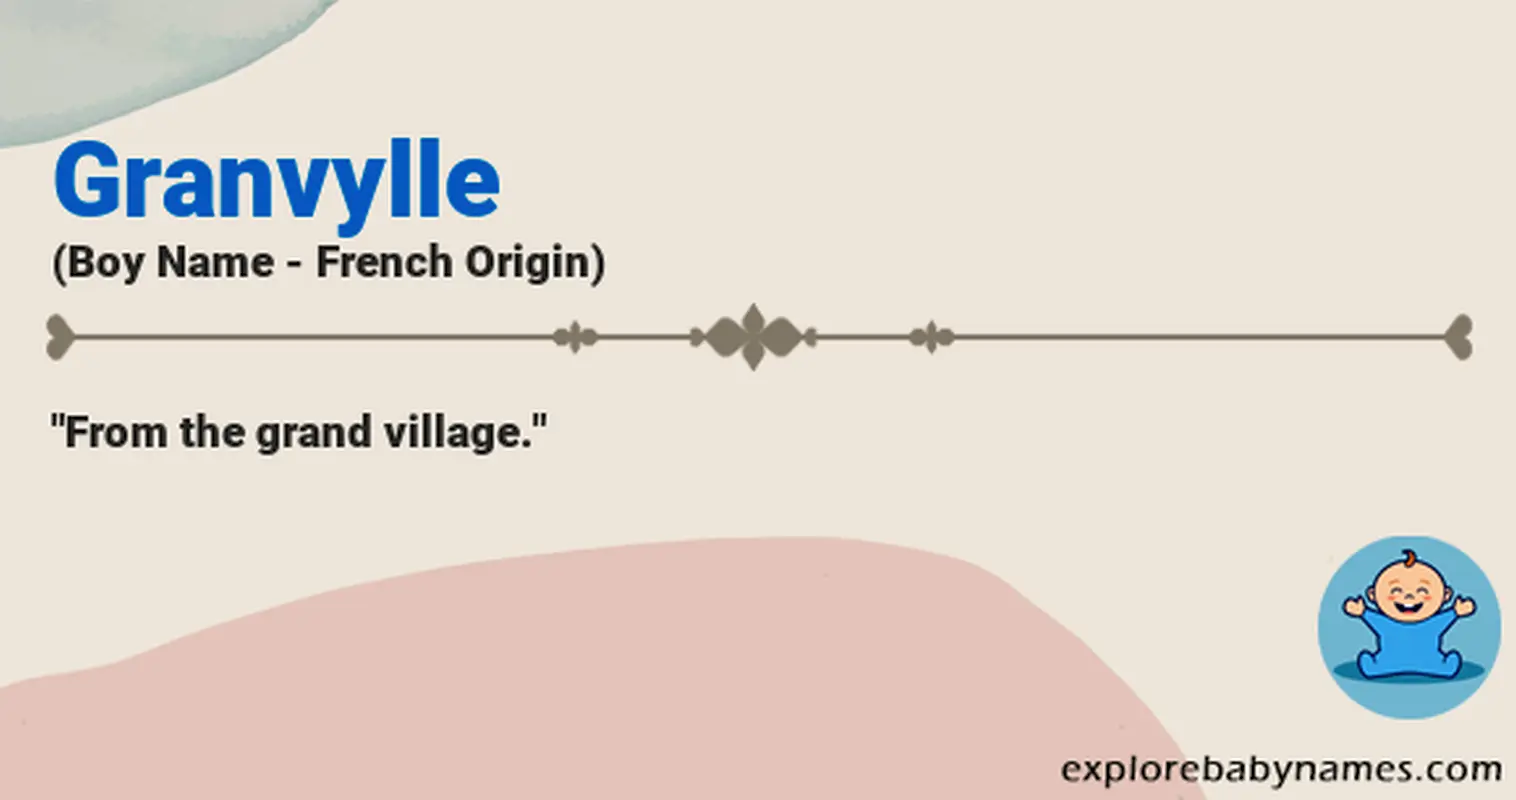 Meaning of Granvylle